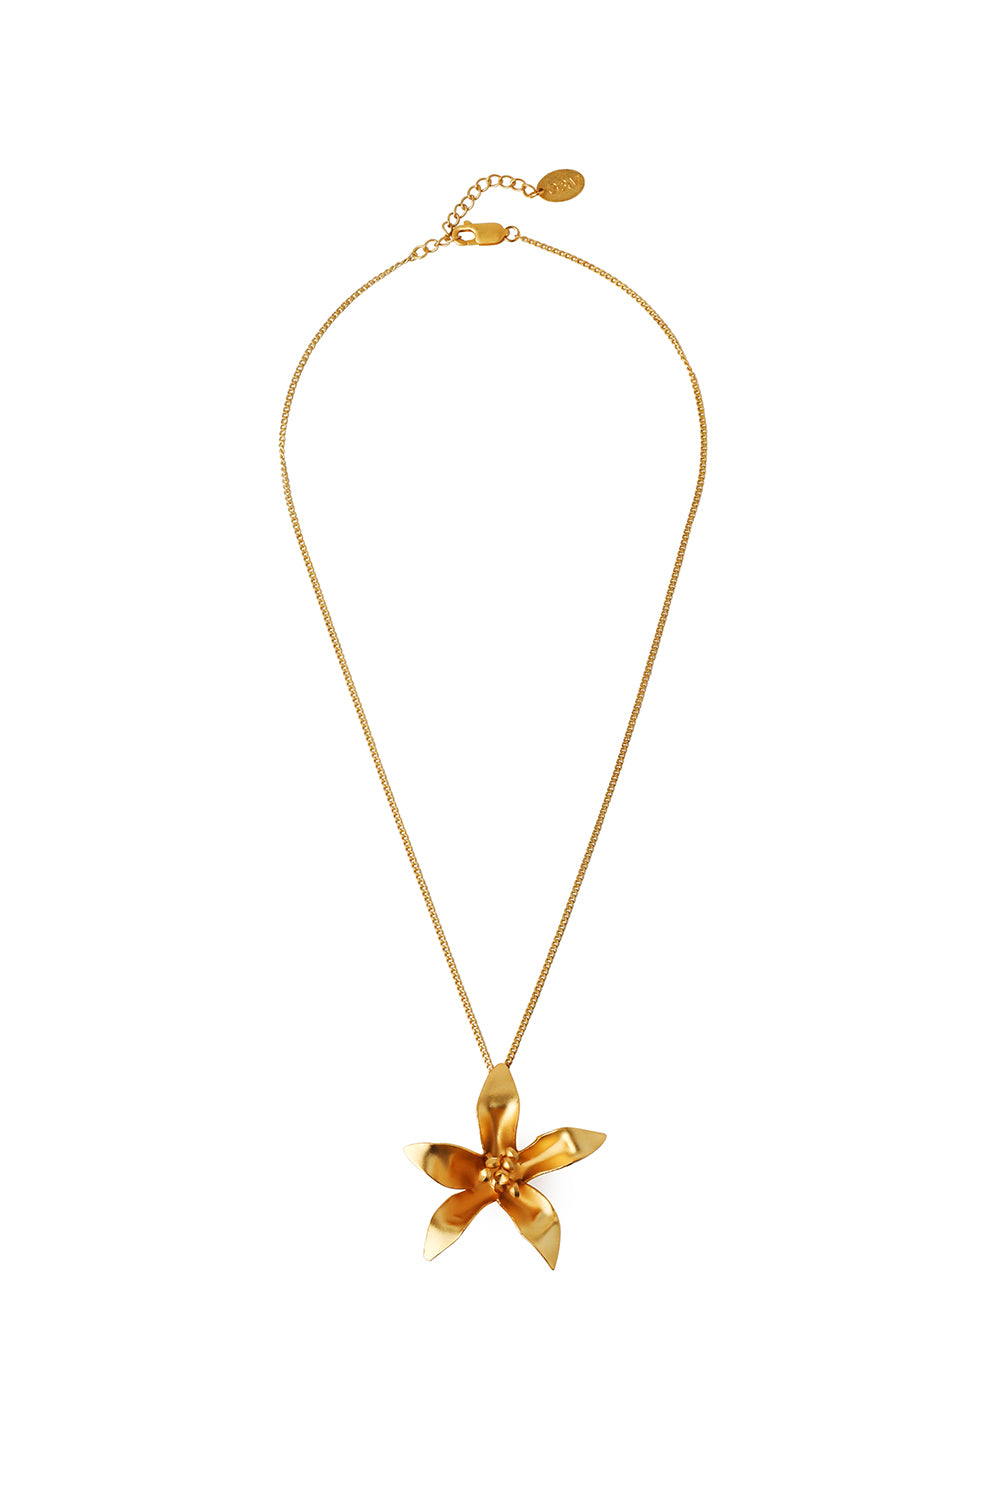 Matte gold flower pendant 24ct gold plated